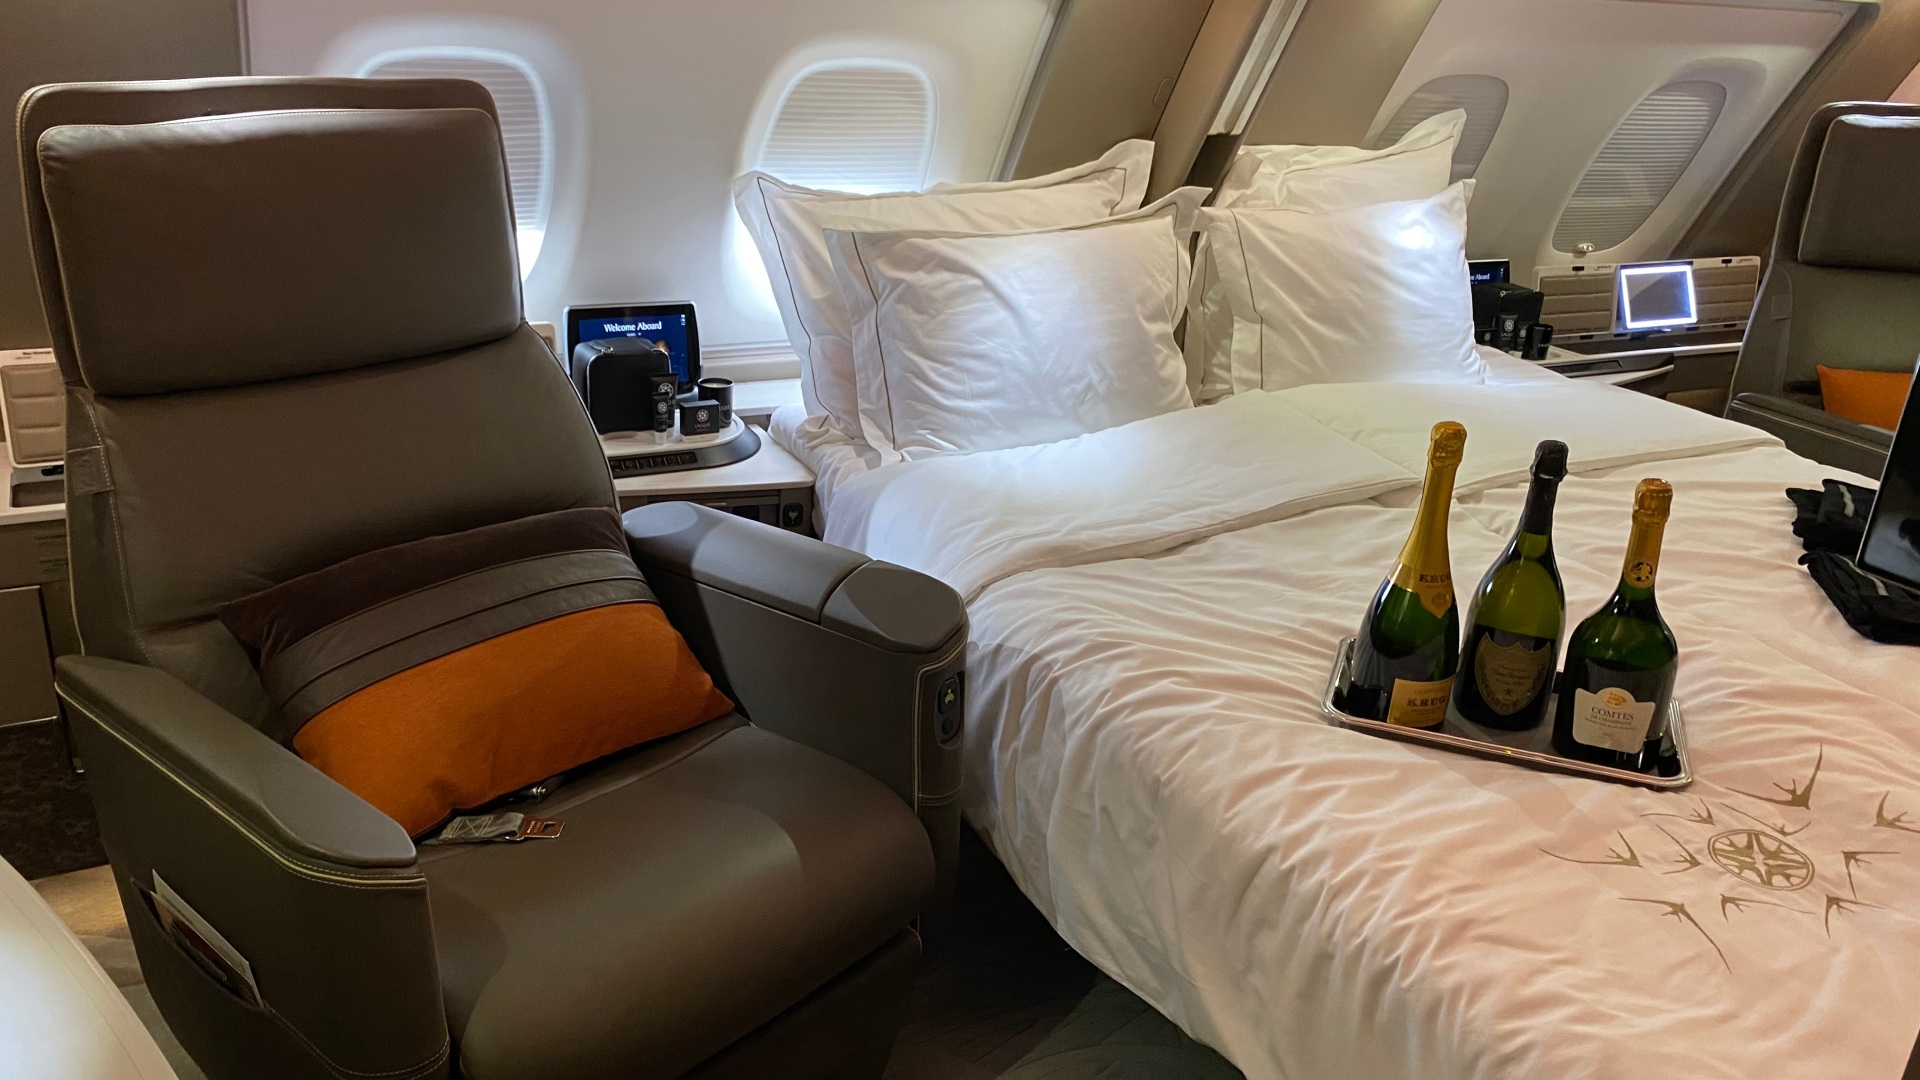 The A380 suites. Photo: Coconuts